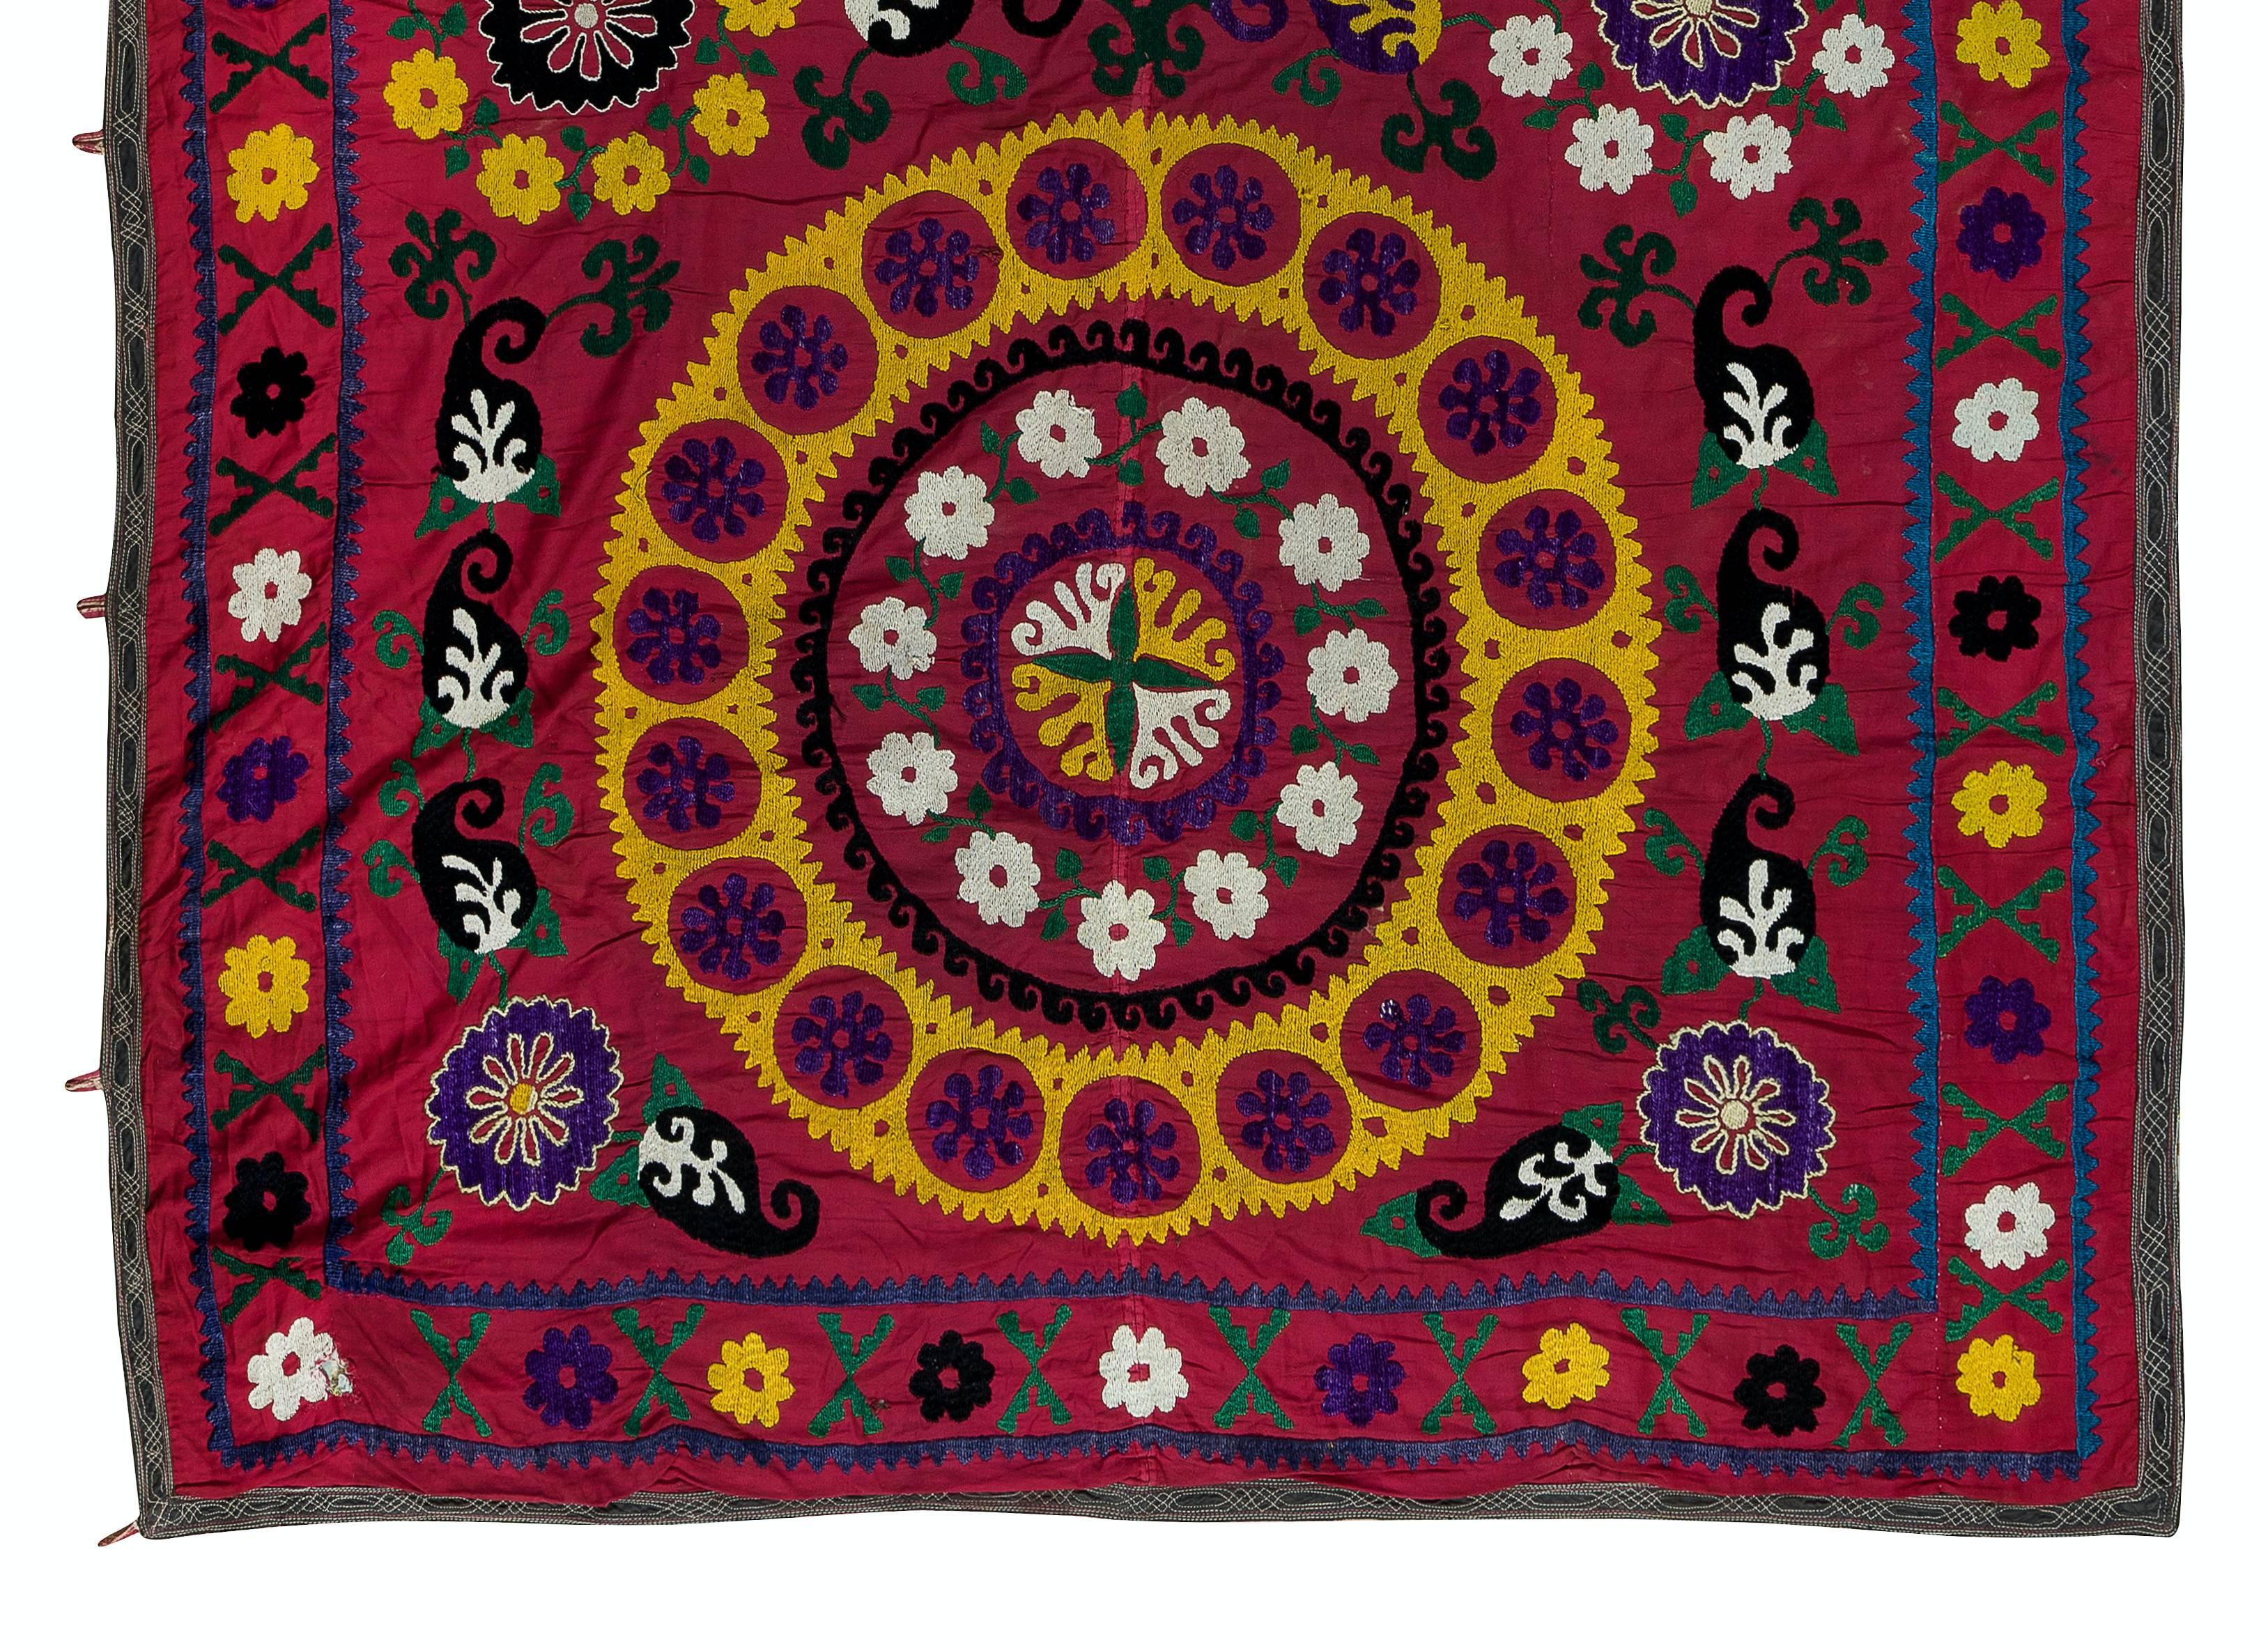 Embroidered Silk Hand Embroidery Throw, Vintage Suzani Tapestry, Uzbek Wall Hanging For Sale